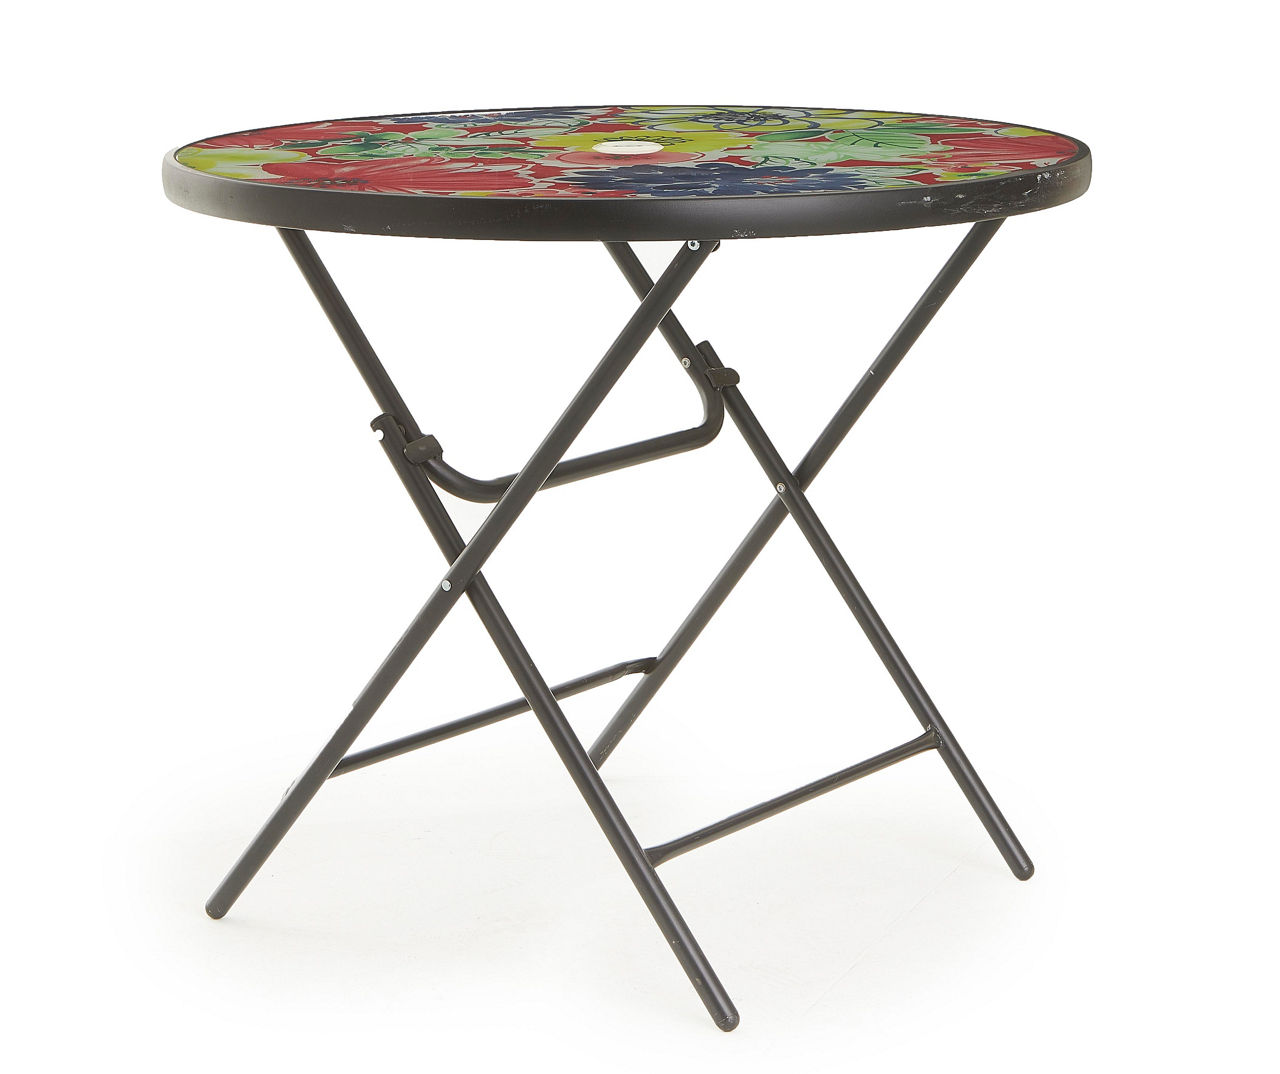 Floral Glass & Steel Outdoor Folding Table